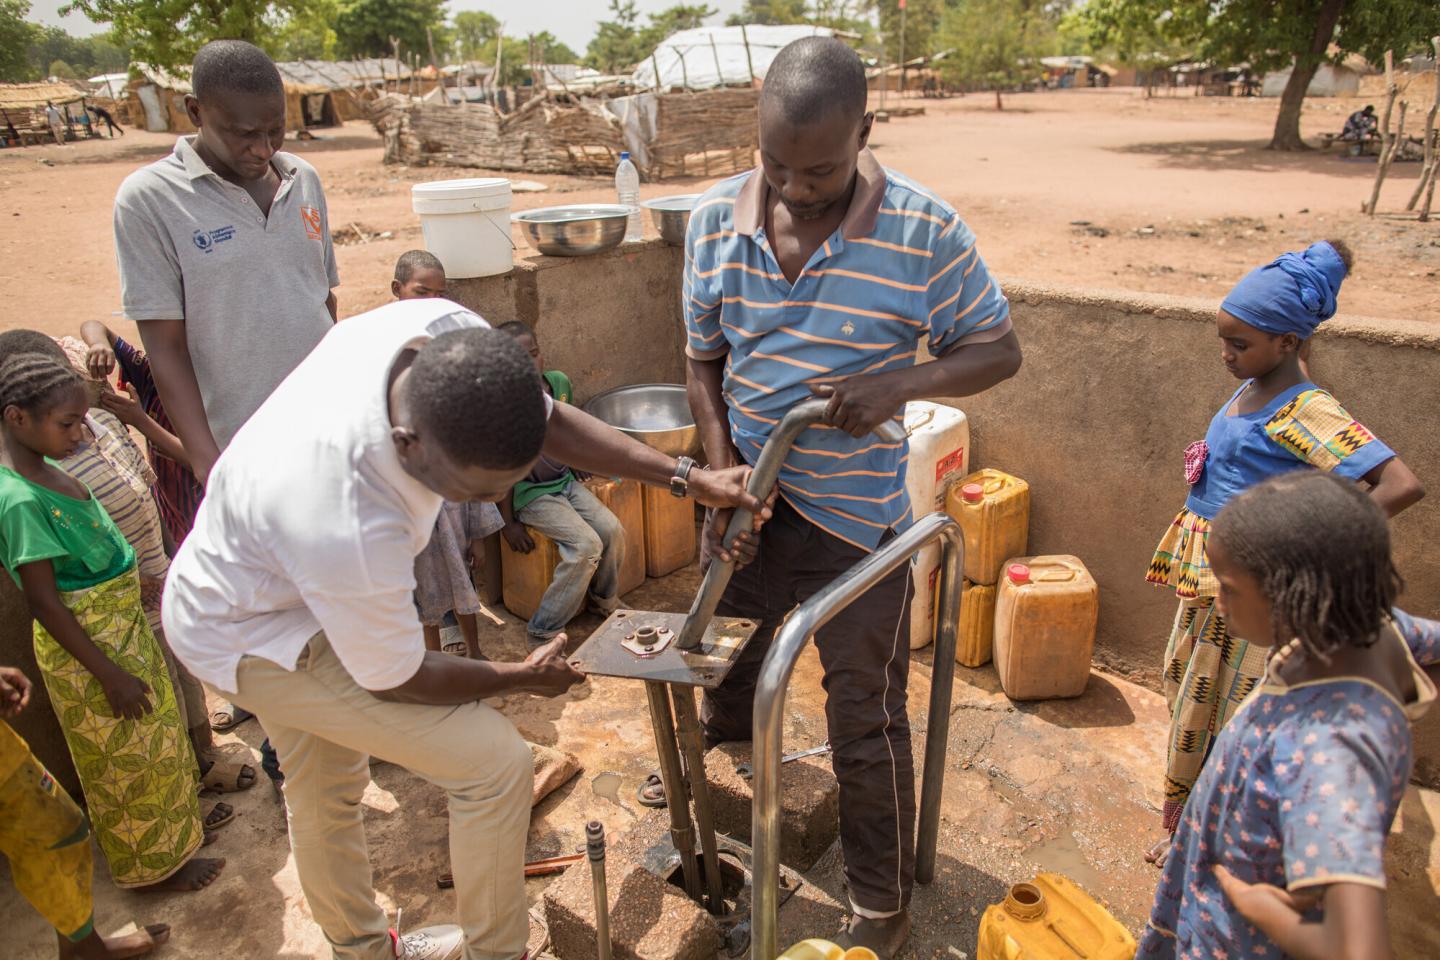 Two Chadian men work on a water pump while several children watch